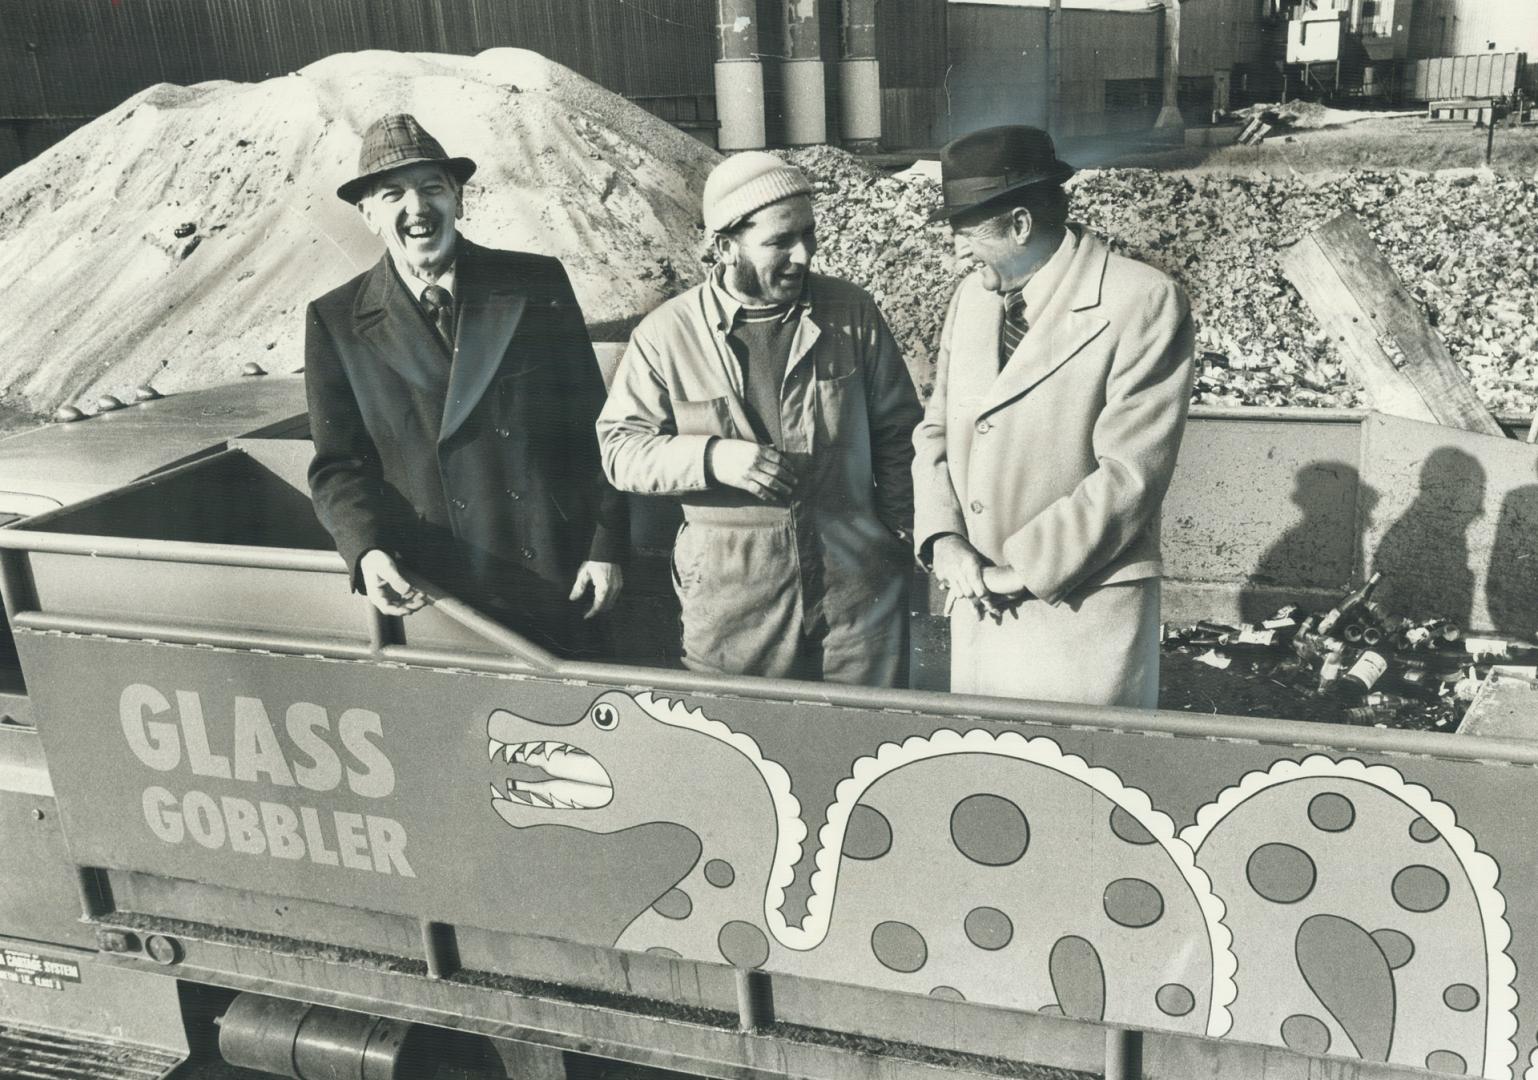 Three men in the truck are pointing to the name on the side, Glass Gobbler, which defines its job